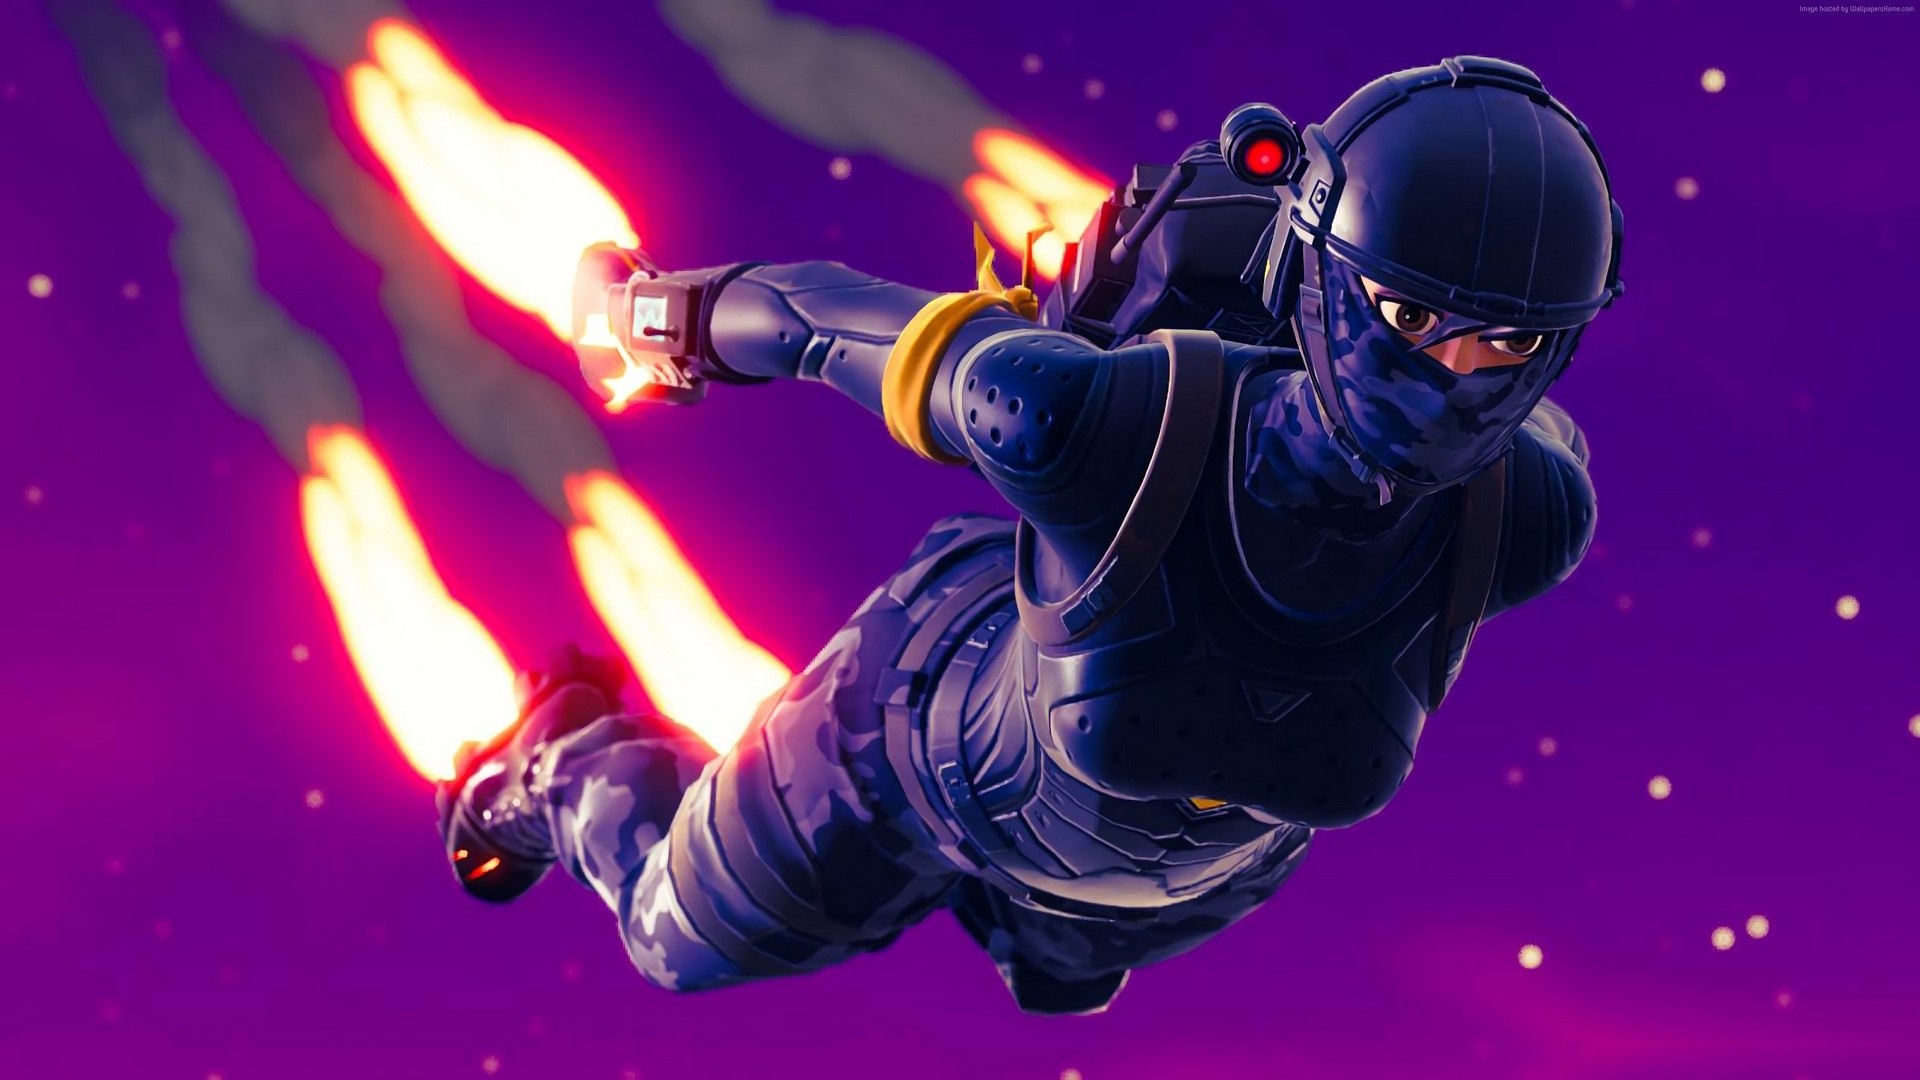 Computer Wallpapers Fortnite with high-resolution 1920x1080 pixel. You can use this wallpaper for your Windows and Mac OS computers as well as your Android and iPhone smartphones